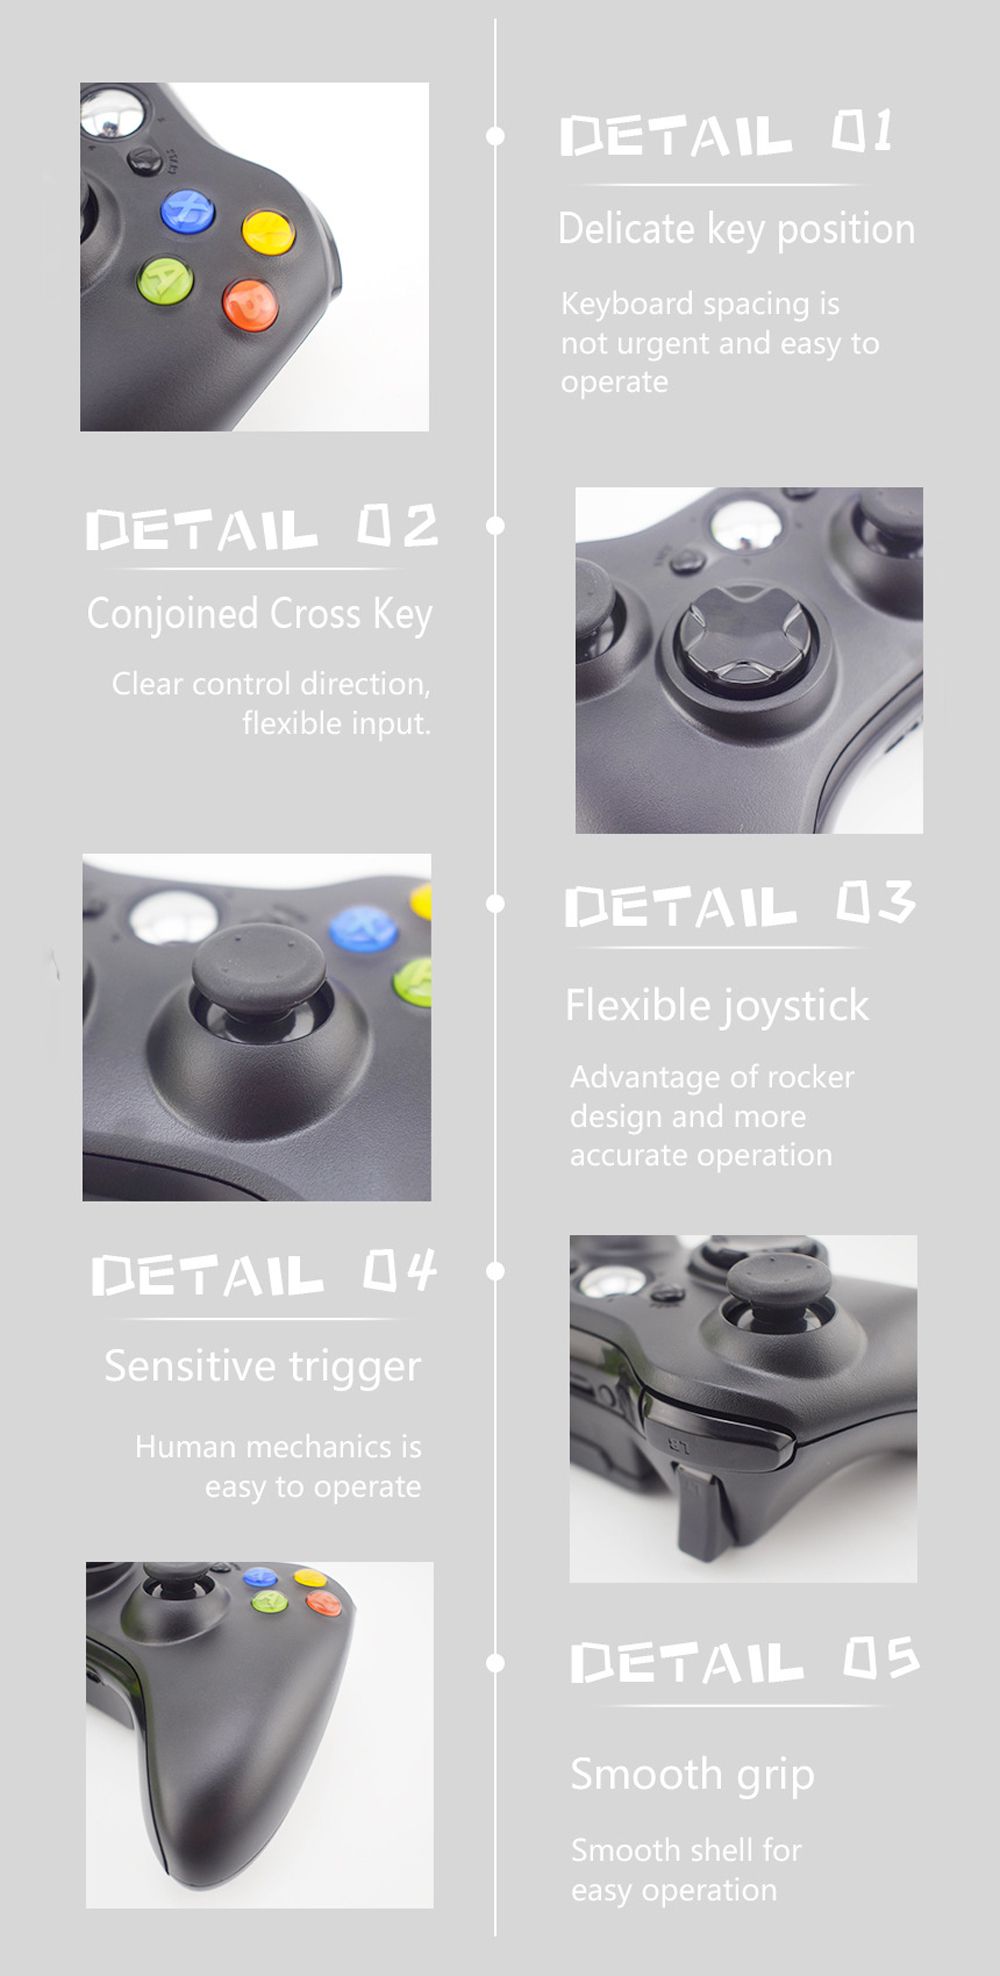 DATA-FROG-24GHz-Wireless-Conjoined-Cross-Key-Rechargeable-Game-Controller-Joystick-Gamepad-for-Xbox--1662809